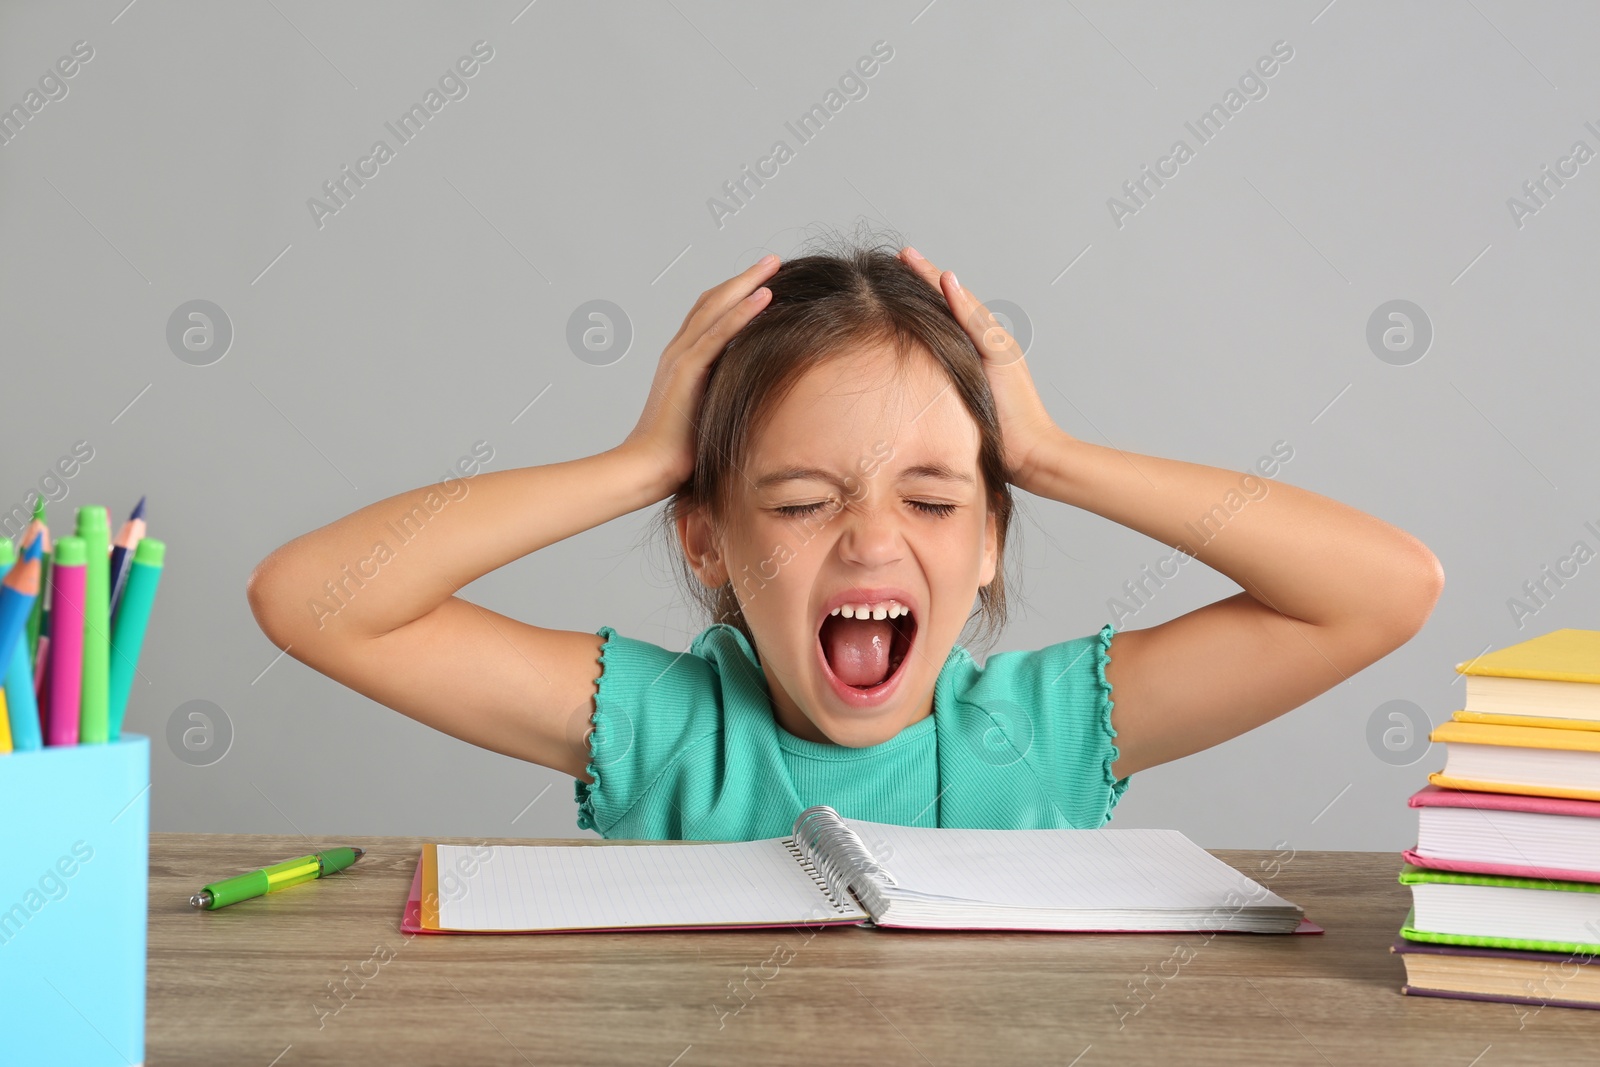 Photo of Emotional little girl doing homework at table on grey background